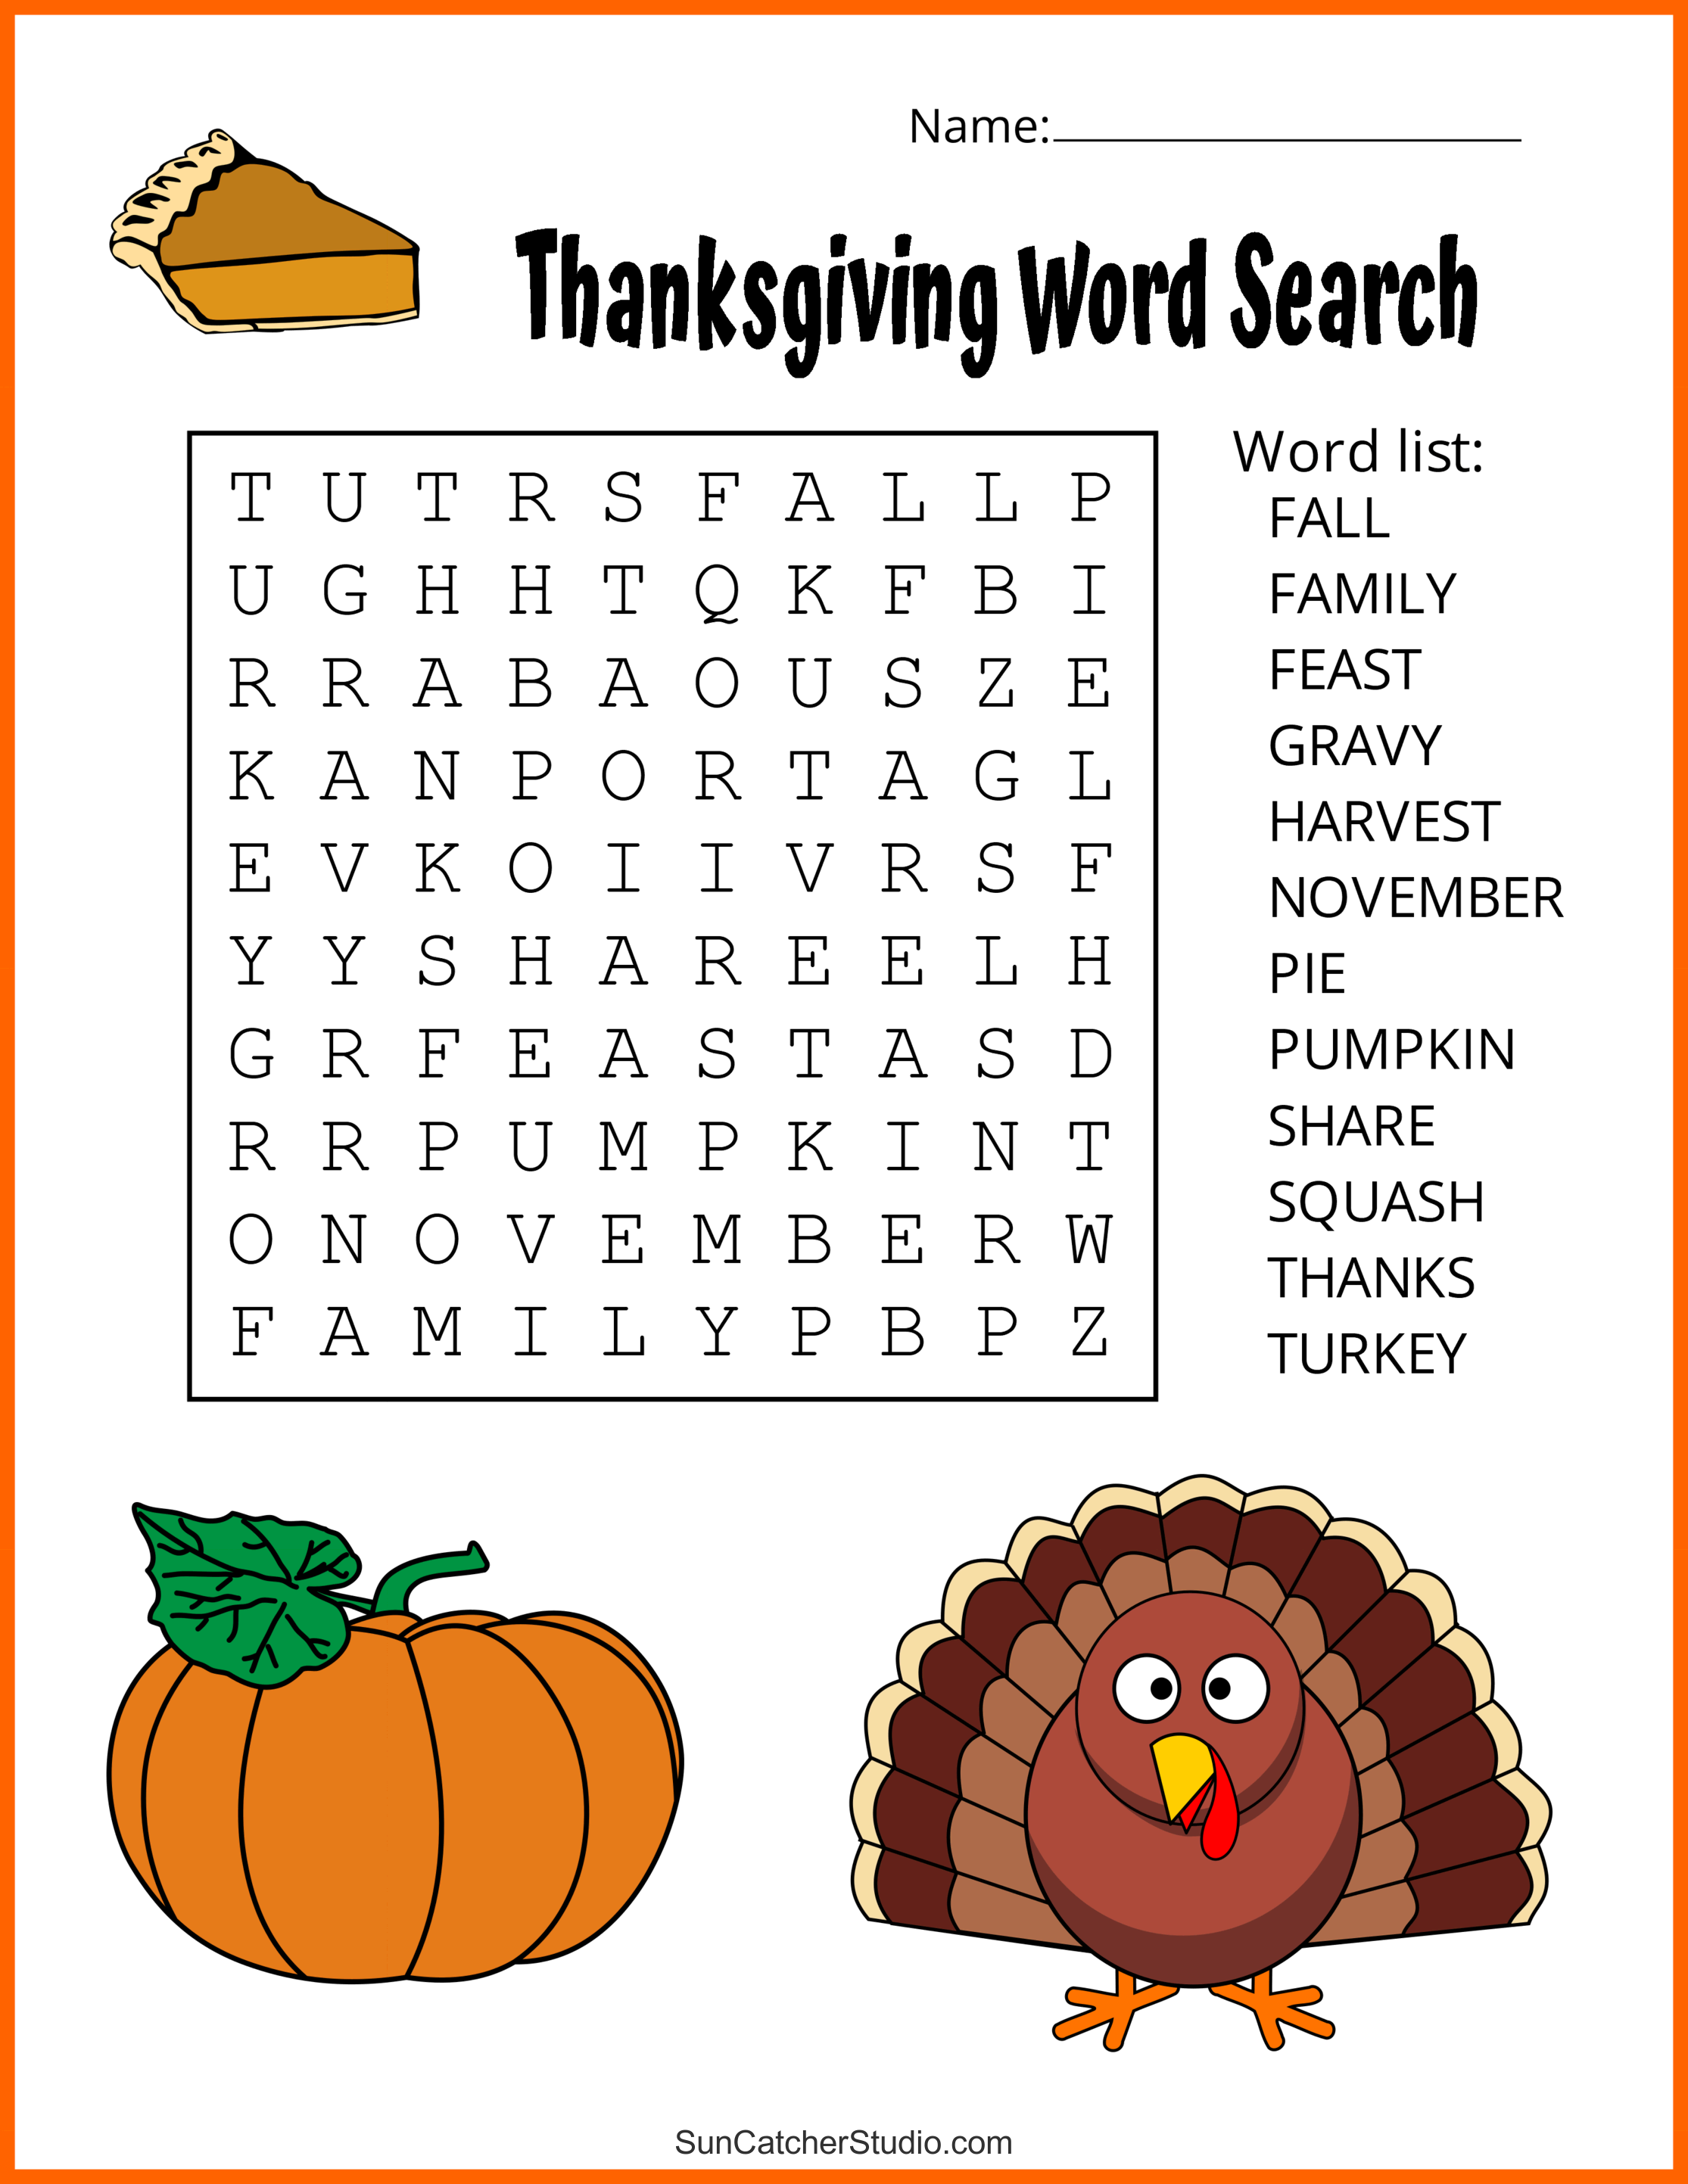 Thanksgiving Word Search (Free Printable Puzzles) DIY Projects